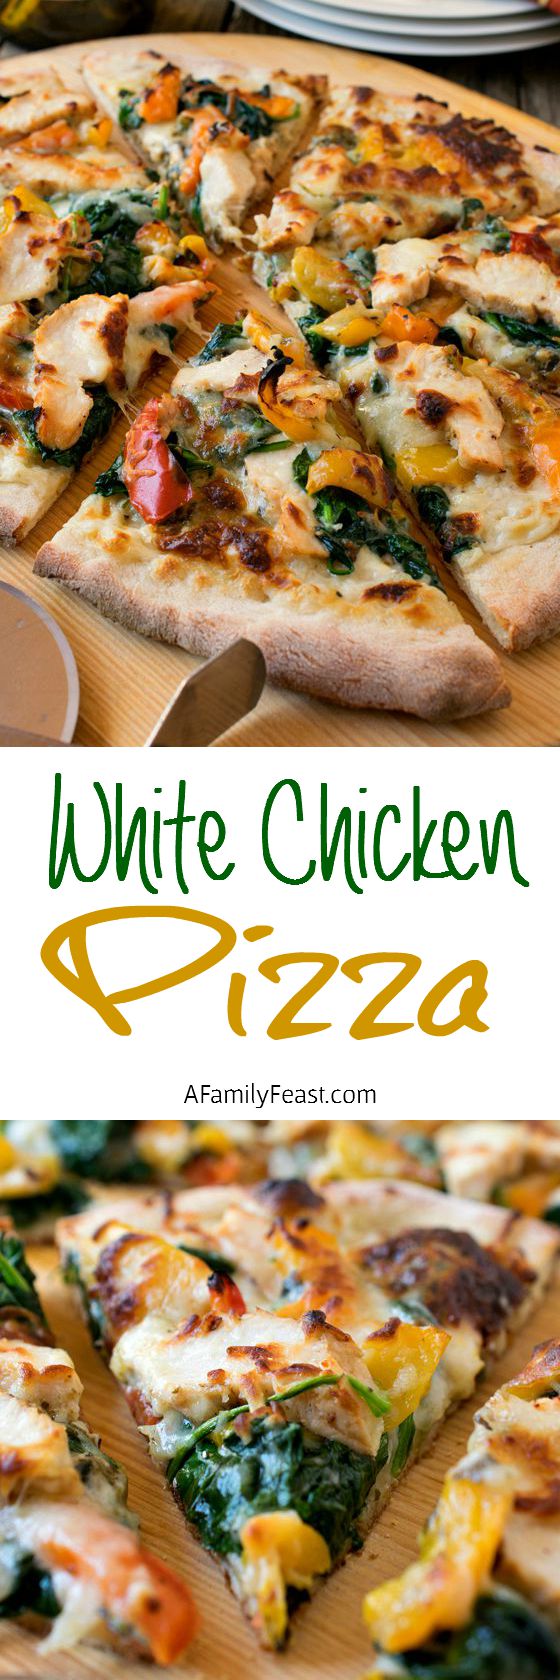 Change family pizza night with this delicious White Chicken Pizza! Grilled chicken, creamy white bechamel, pesto, peppers, spinach and mozzarella! Pizza heaven!